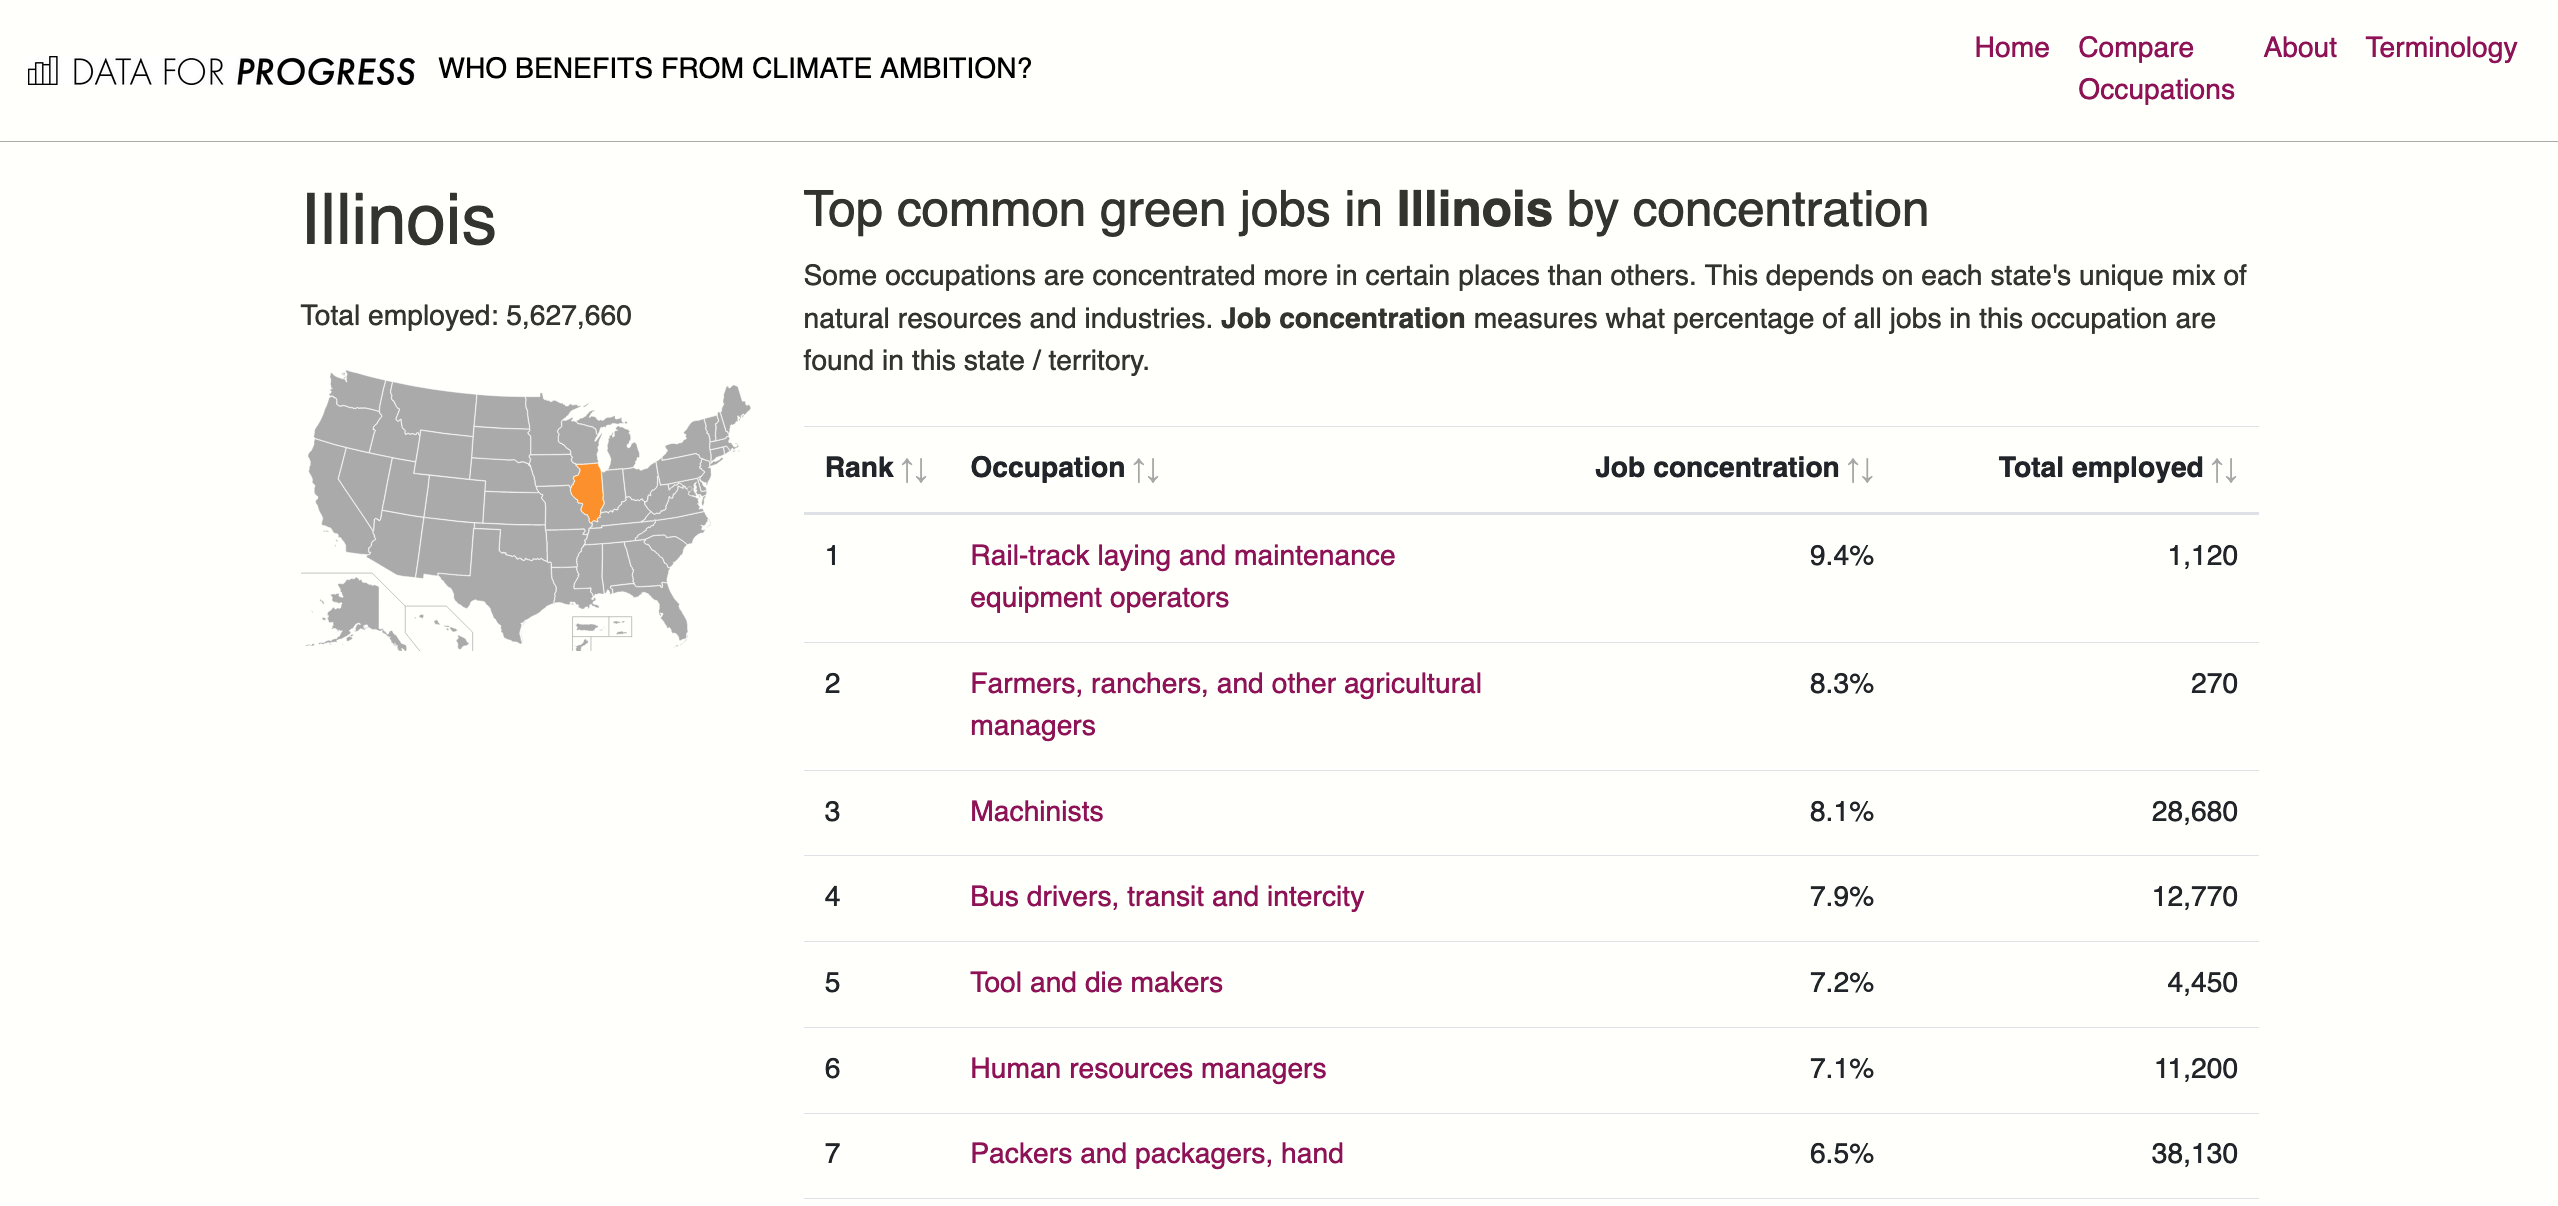 View the top common green jobs by concenration for all US States and Territories